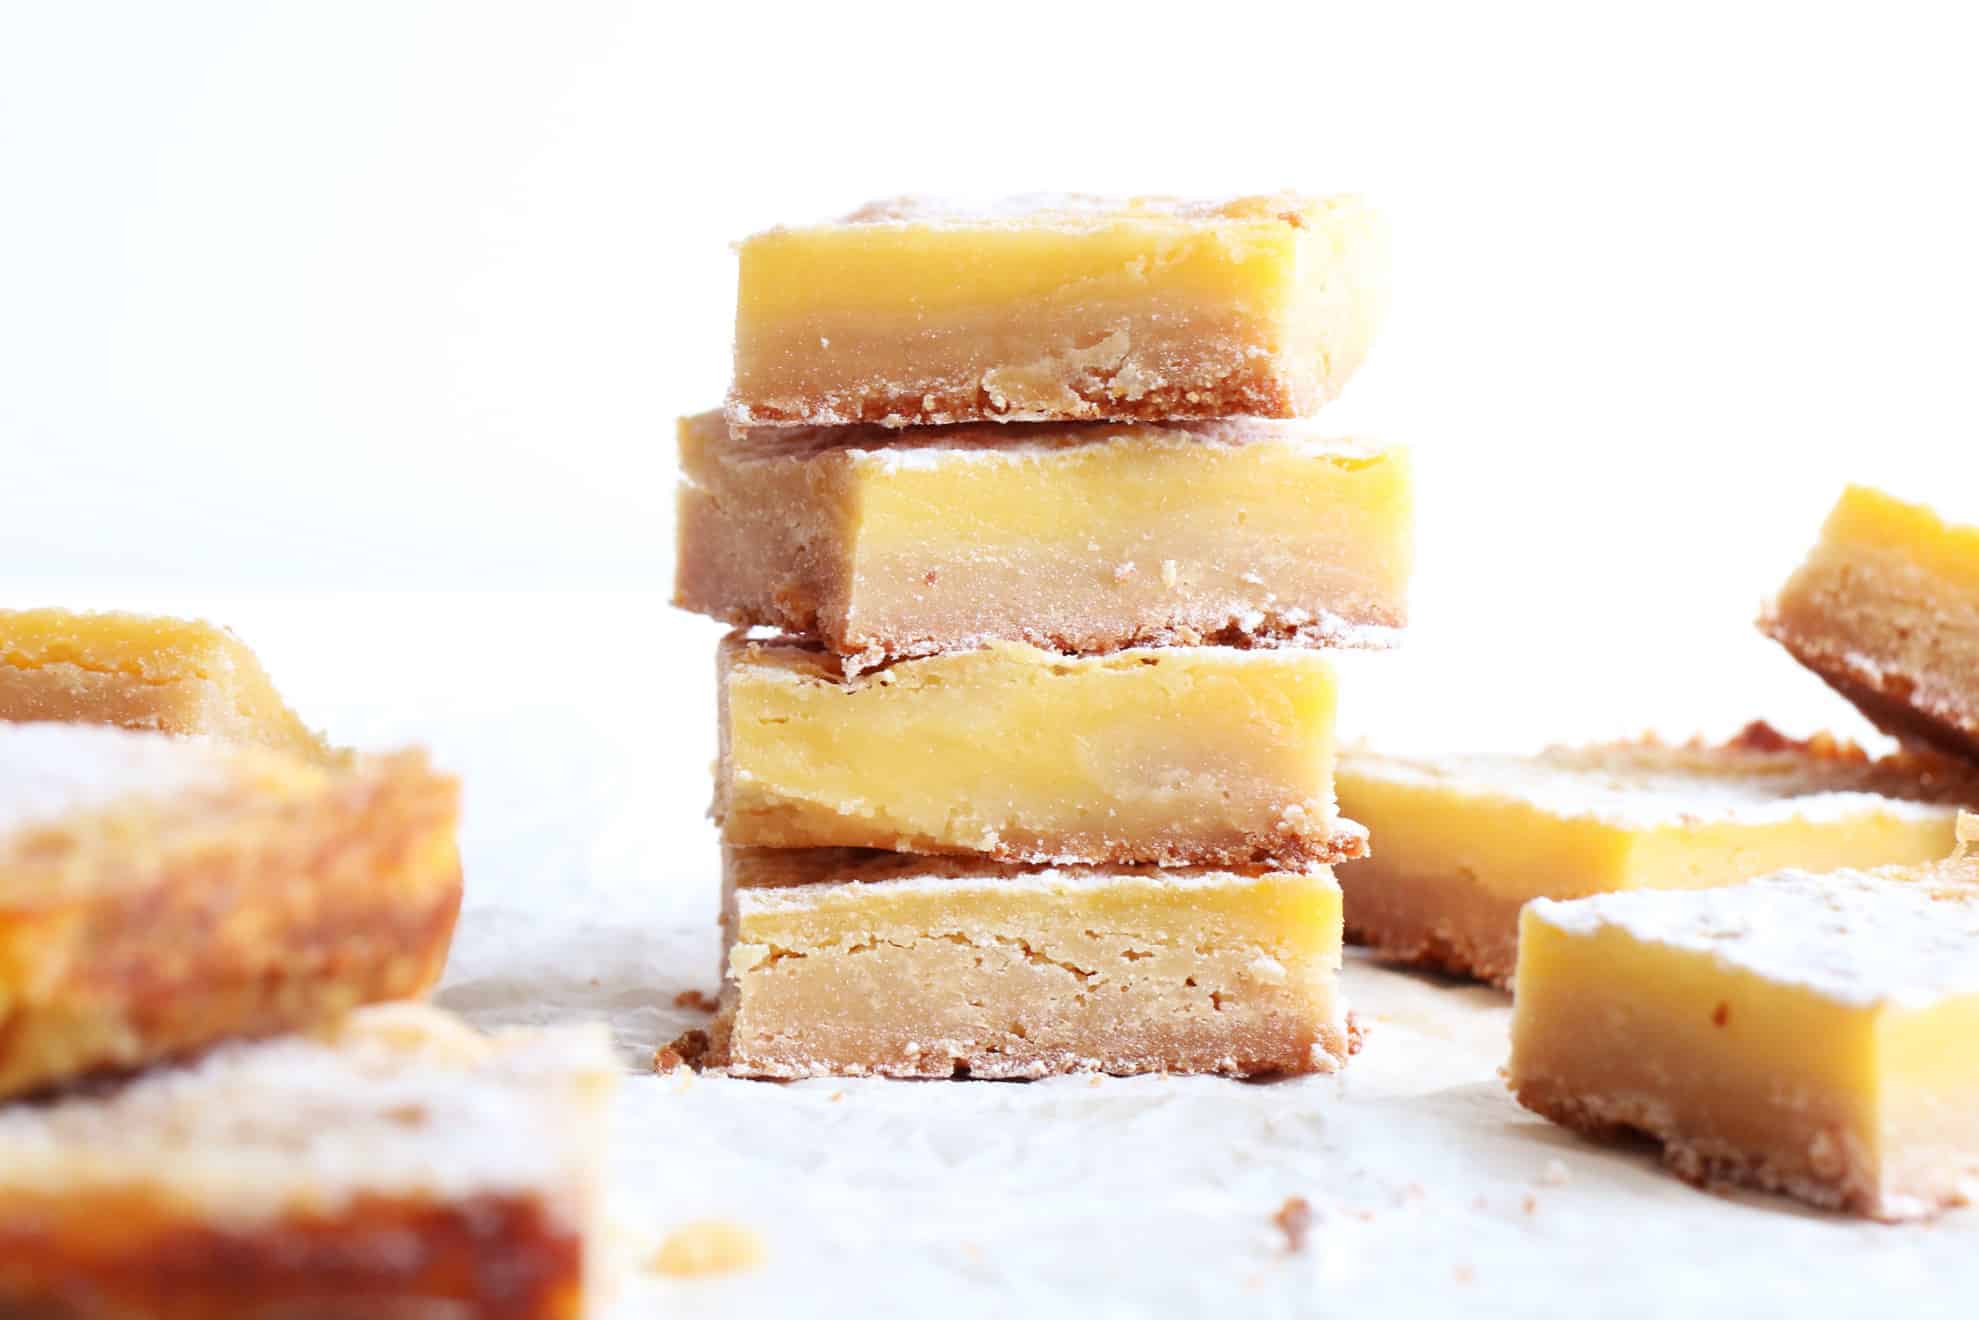 This is a side view of a stack of four lemon bars. The bars are sitting on a white piece of parchment paper with more bars around the stack.